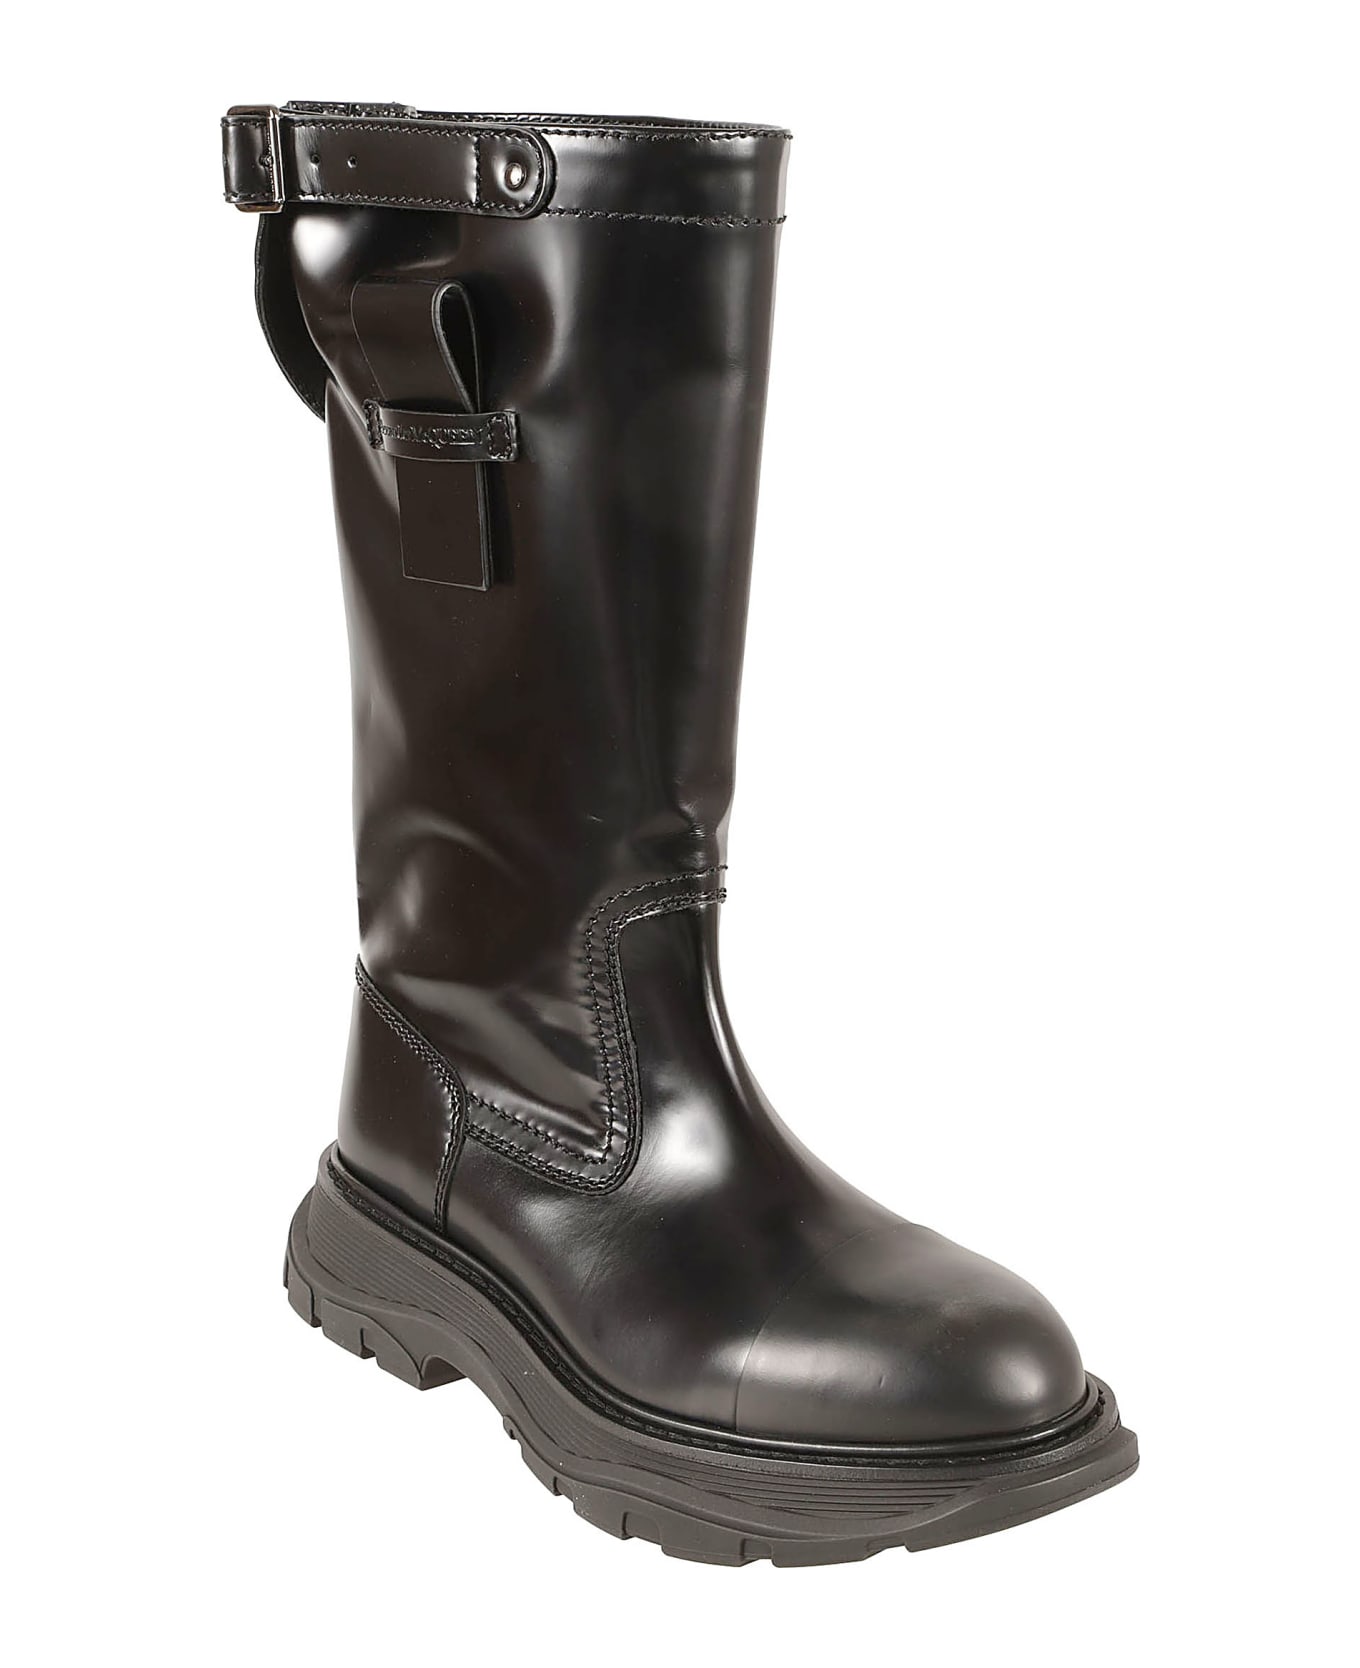 Alexander McQueen Game Leather Boots - Black ブーツ